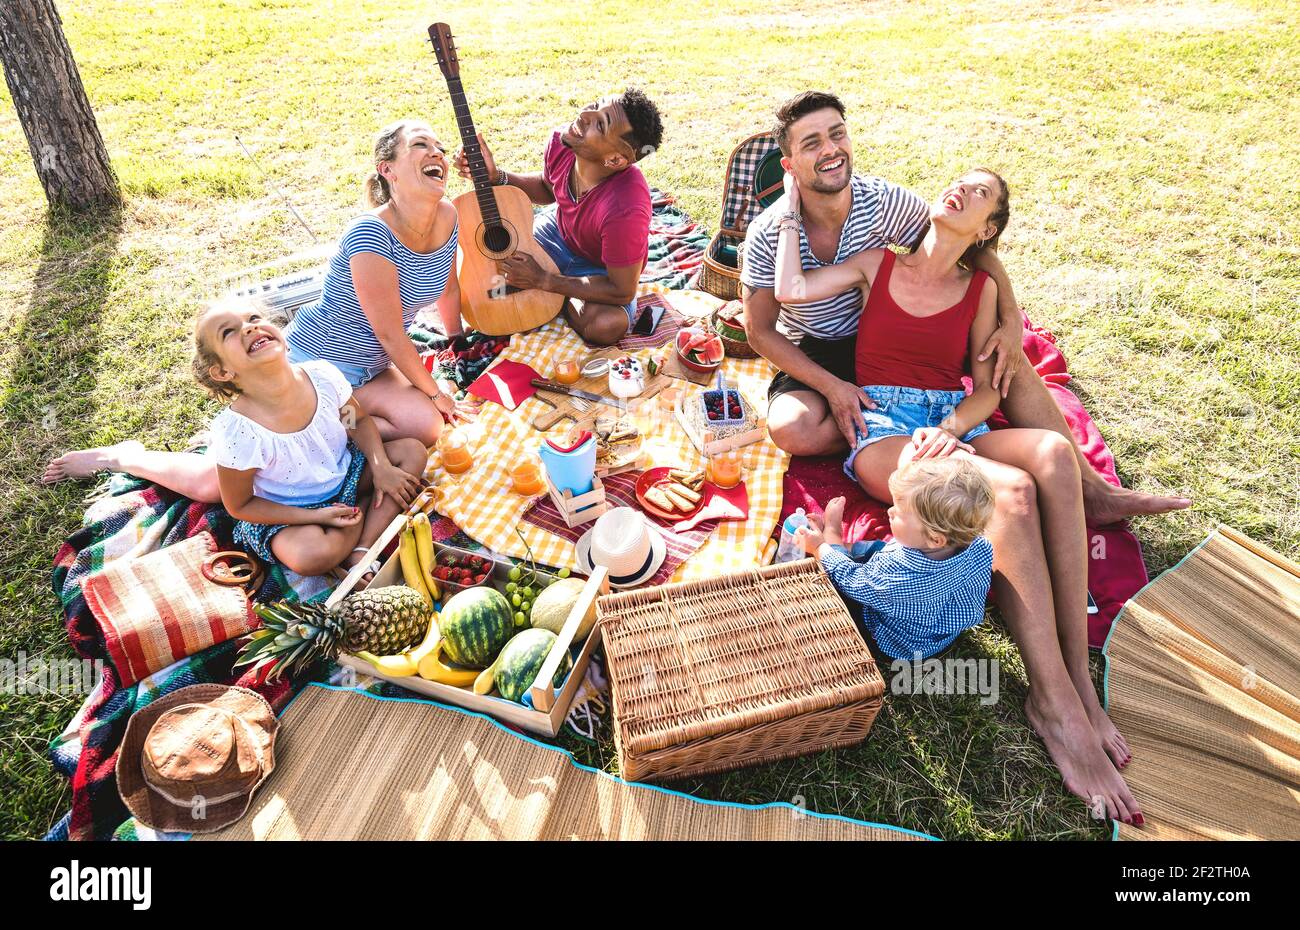 High angle top view of happy family having fun with kids at pic nic barbecue party - Multiracial love concept with mixed race people playing together Stock Photo